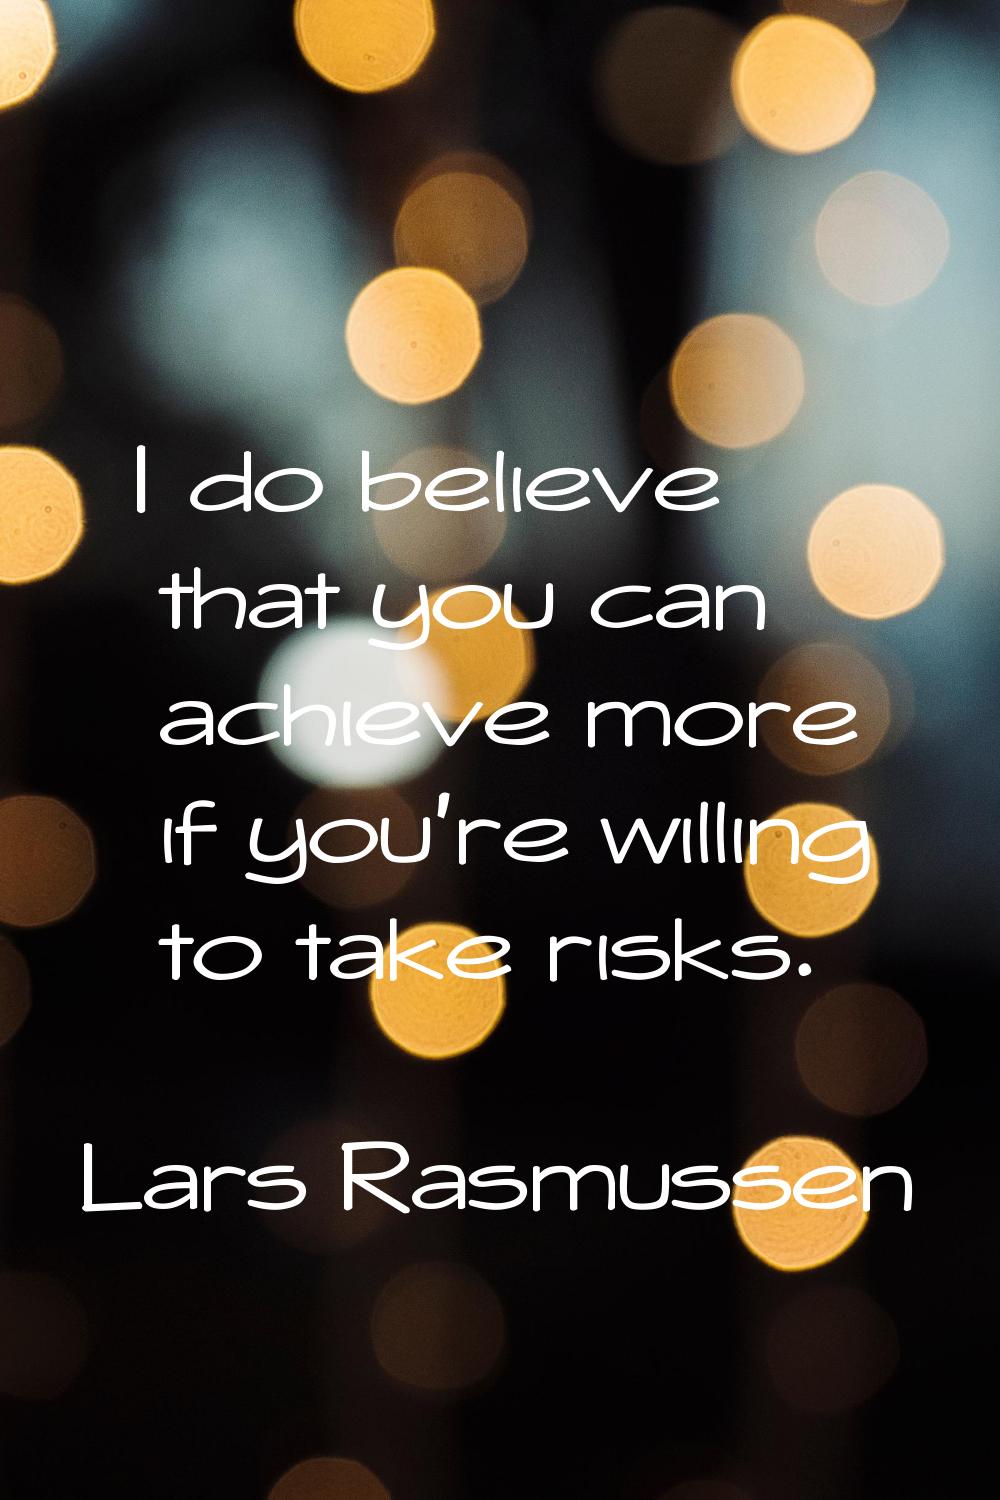 I do believe that you can achieve more if you're willing to take risks.